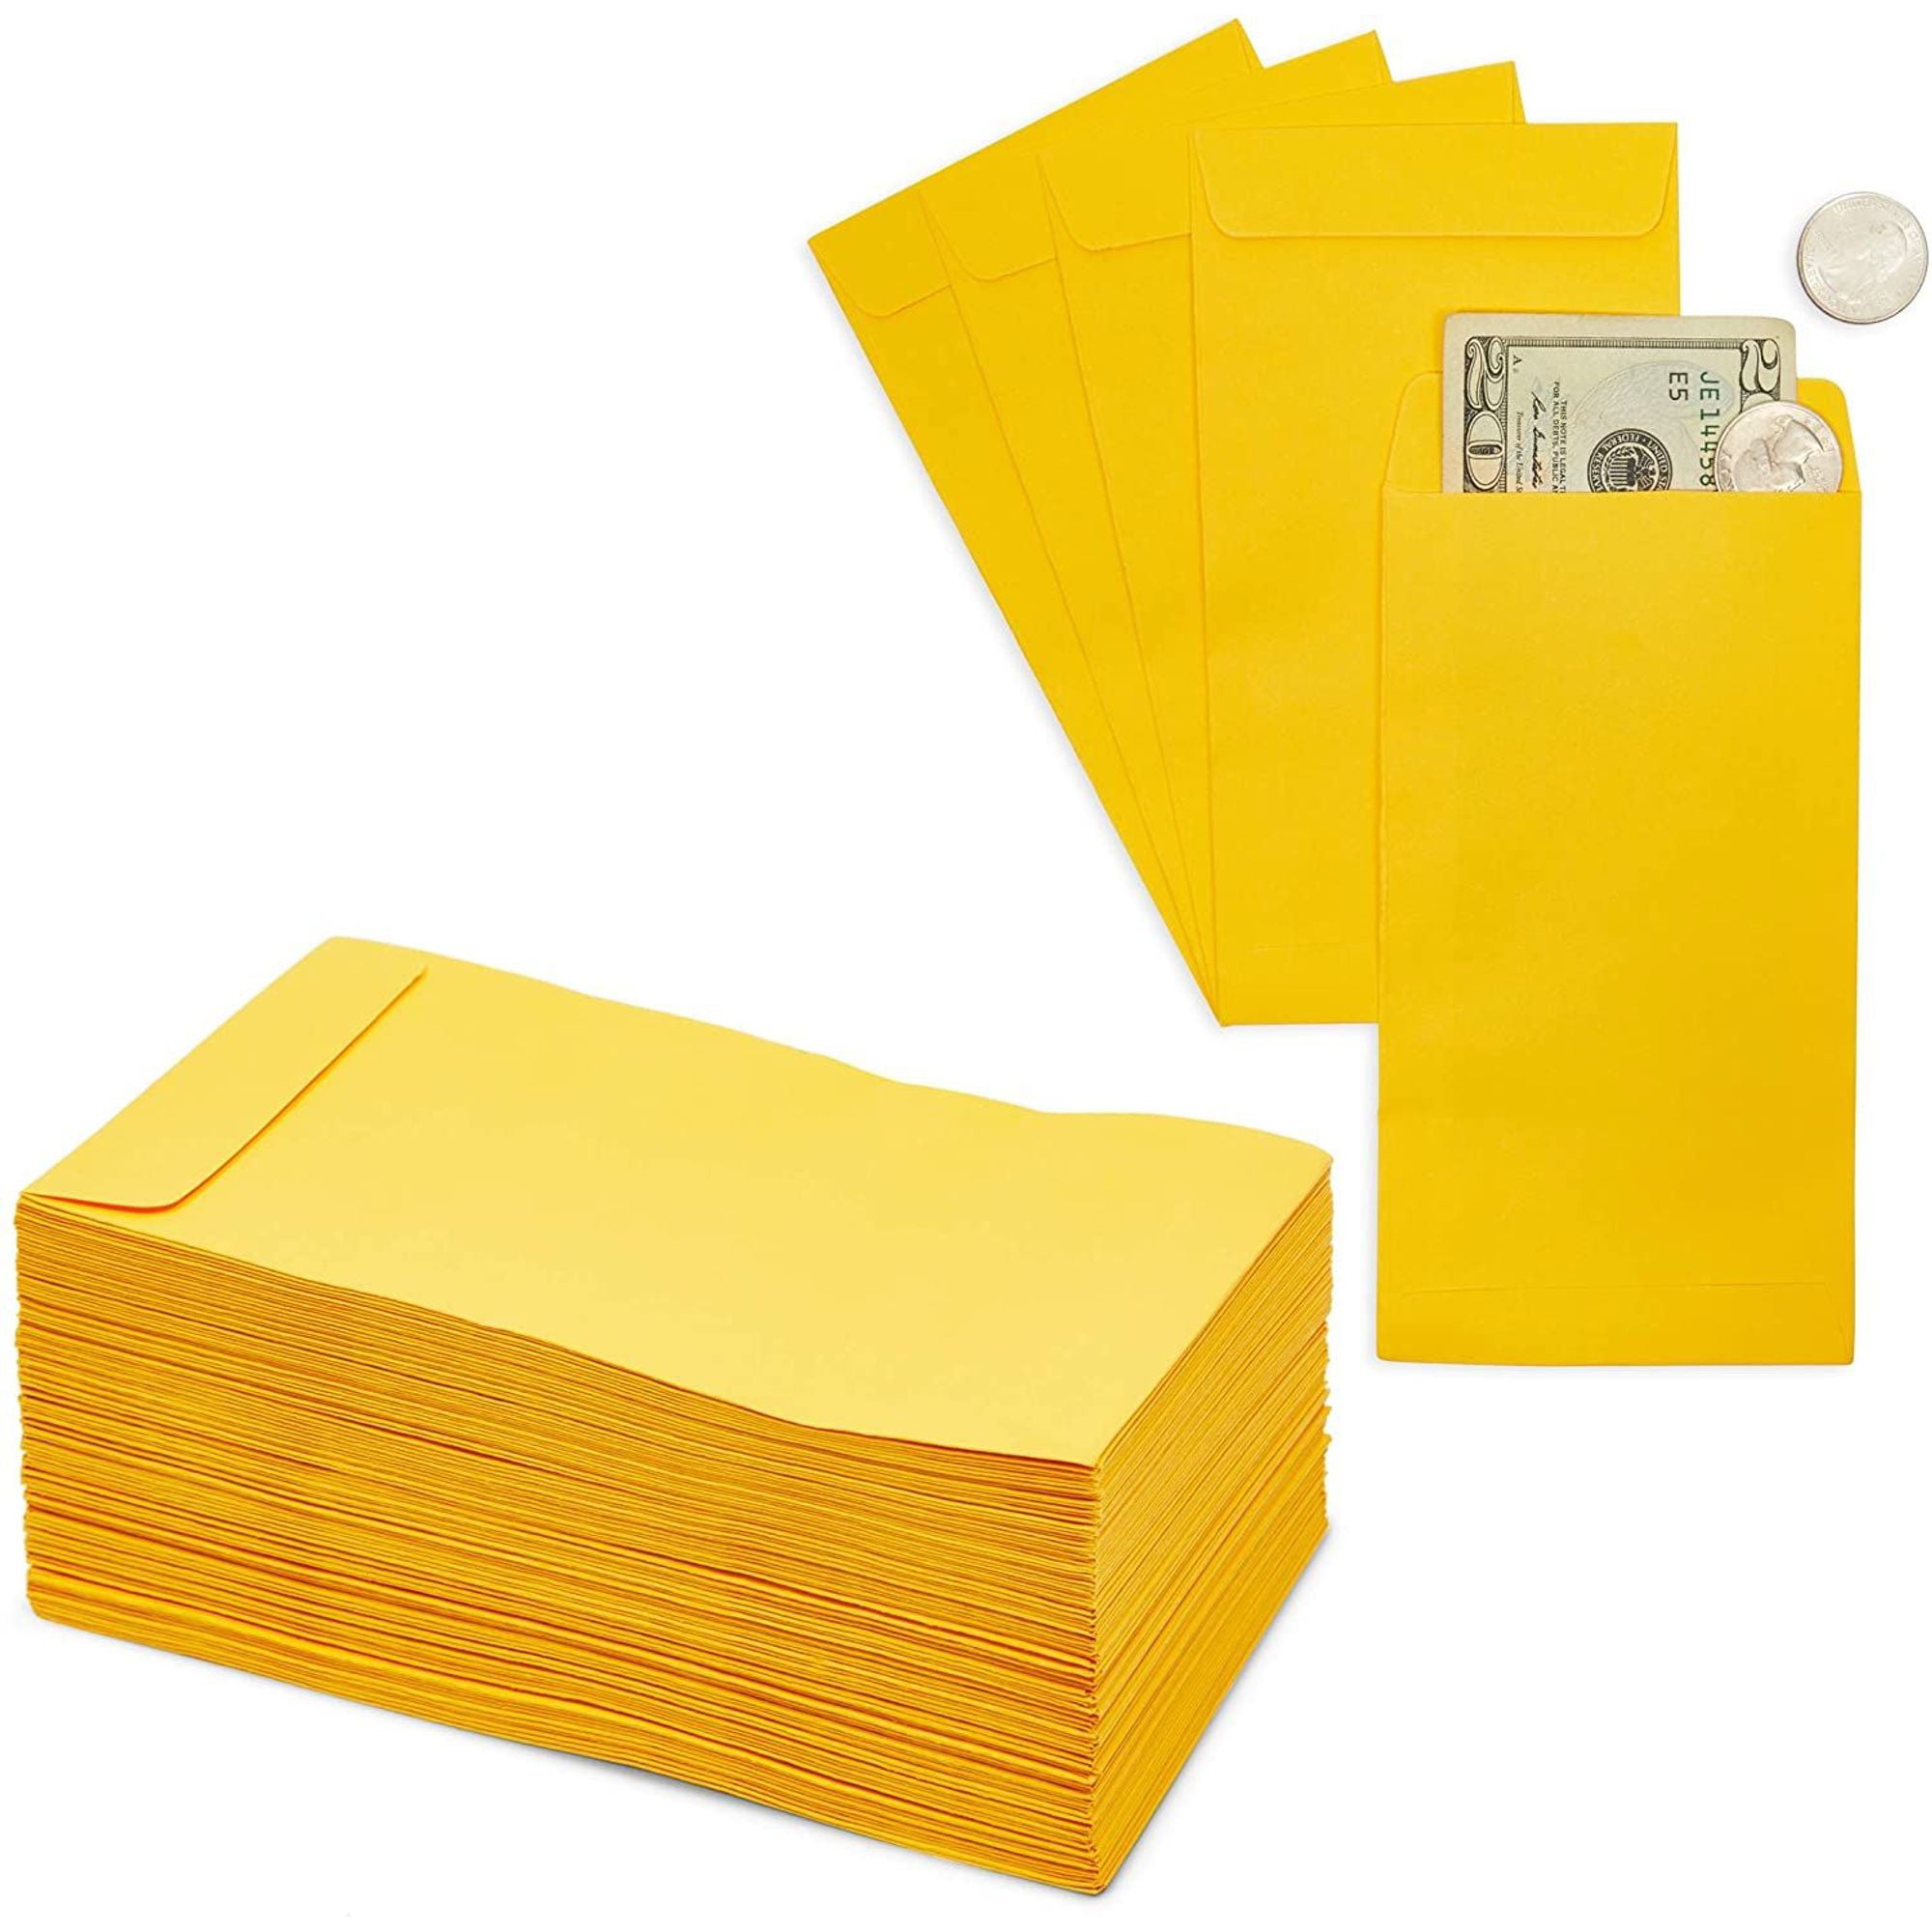 40 KRAFT COIN ENVELOPES JEWELRY STAMPS CHANGE GIFT ENVELOPE #7 SIZE 3.5" X 6.5" 